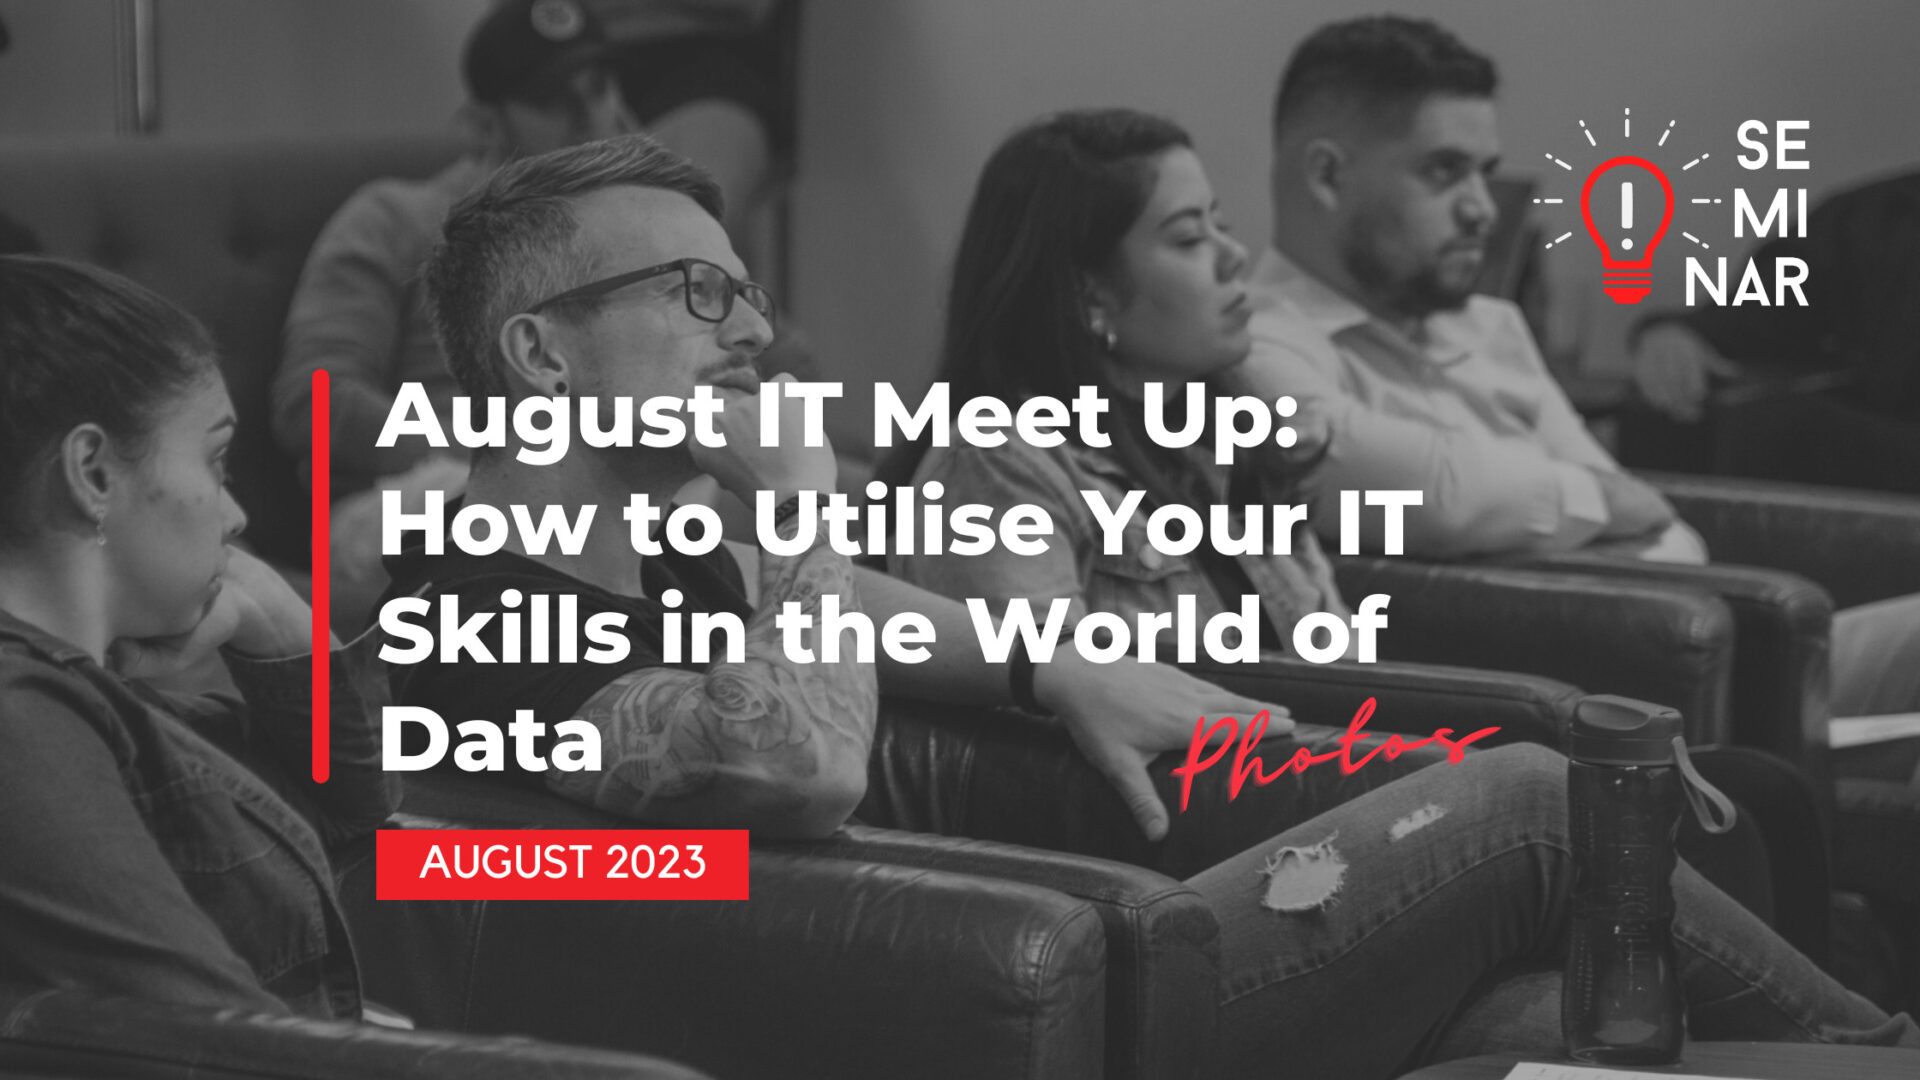 A Visual Recap of Our August IT Meet Up – How to Utilise Your IT Skills in the World of Data